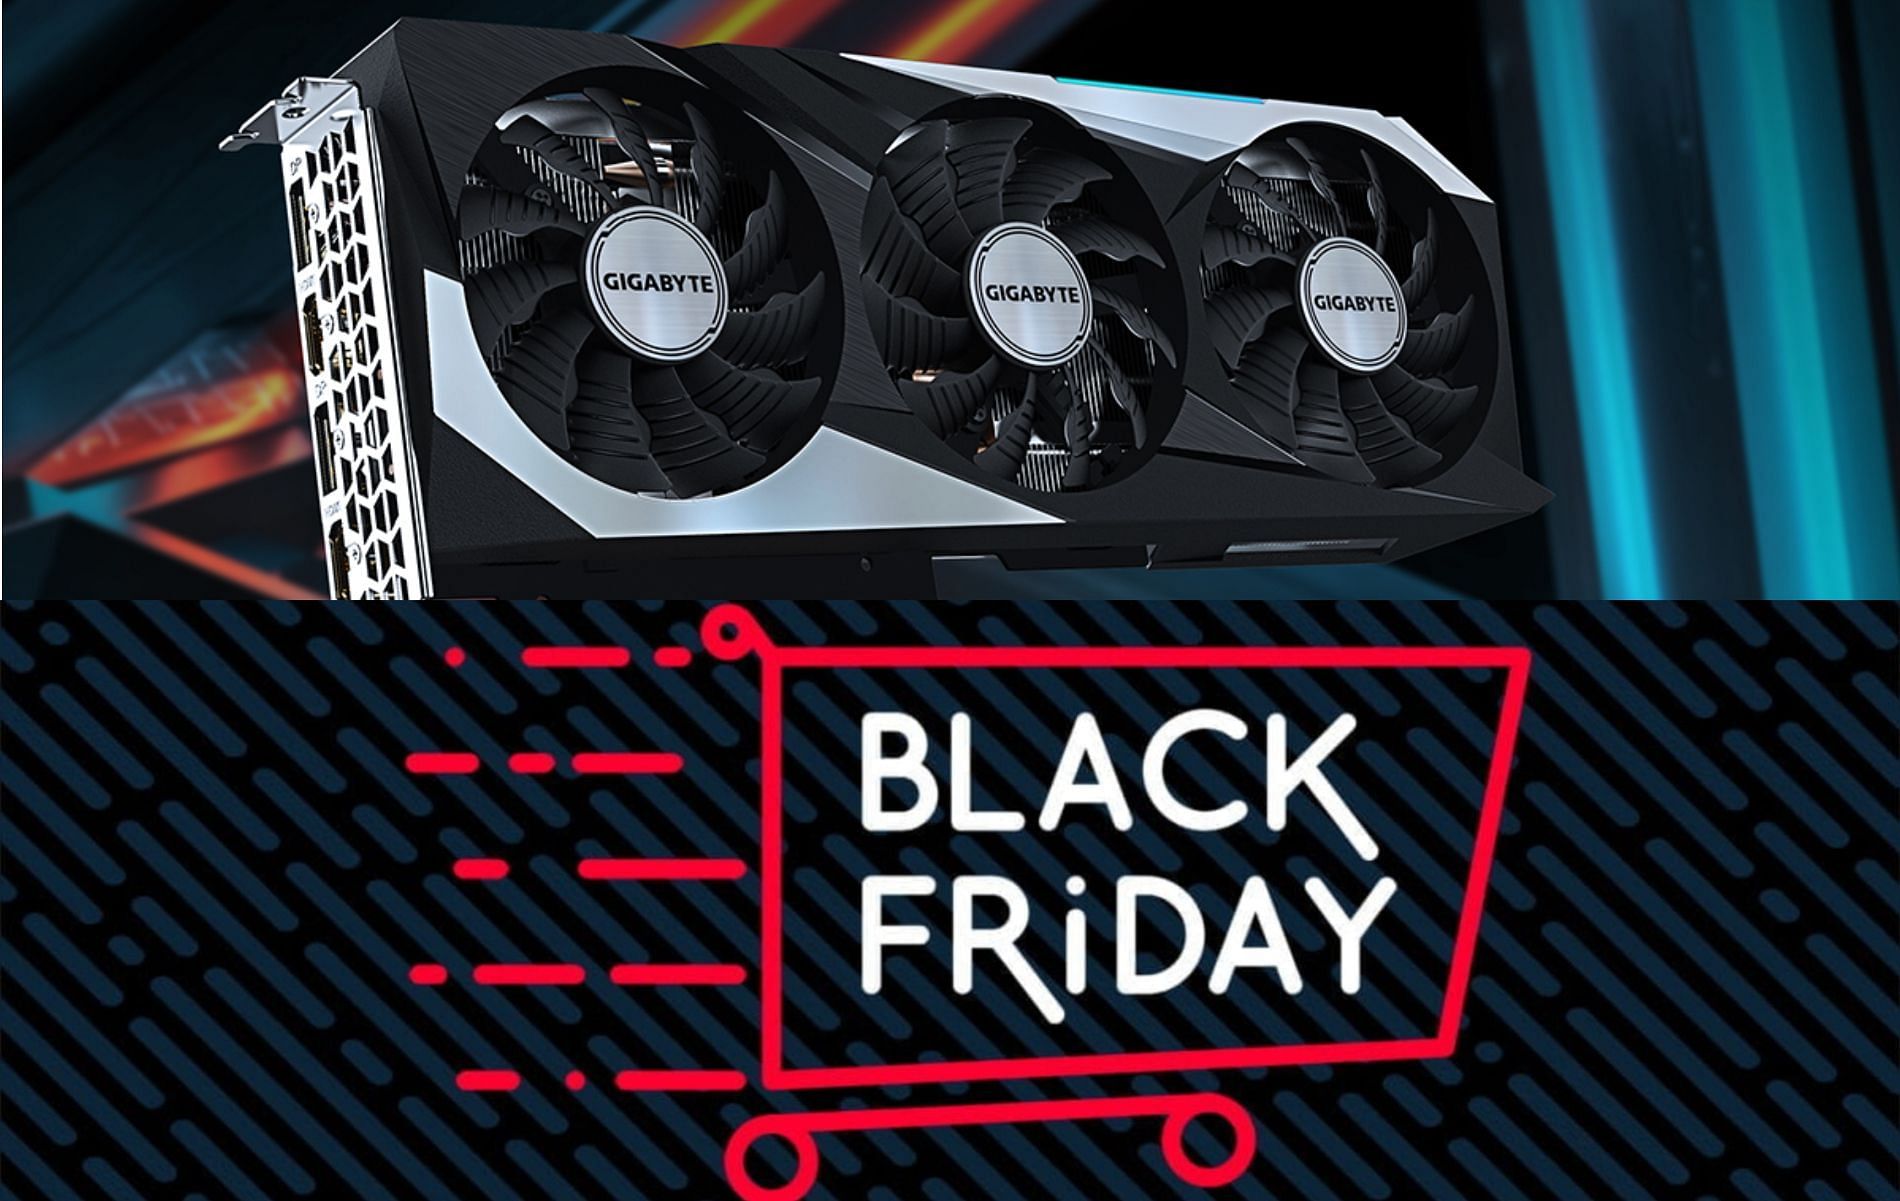 Black Friday PC gaming deals — best sales